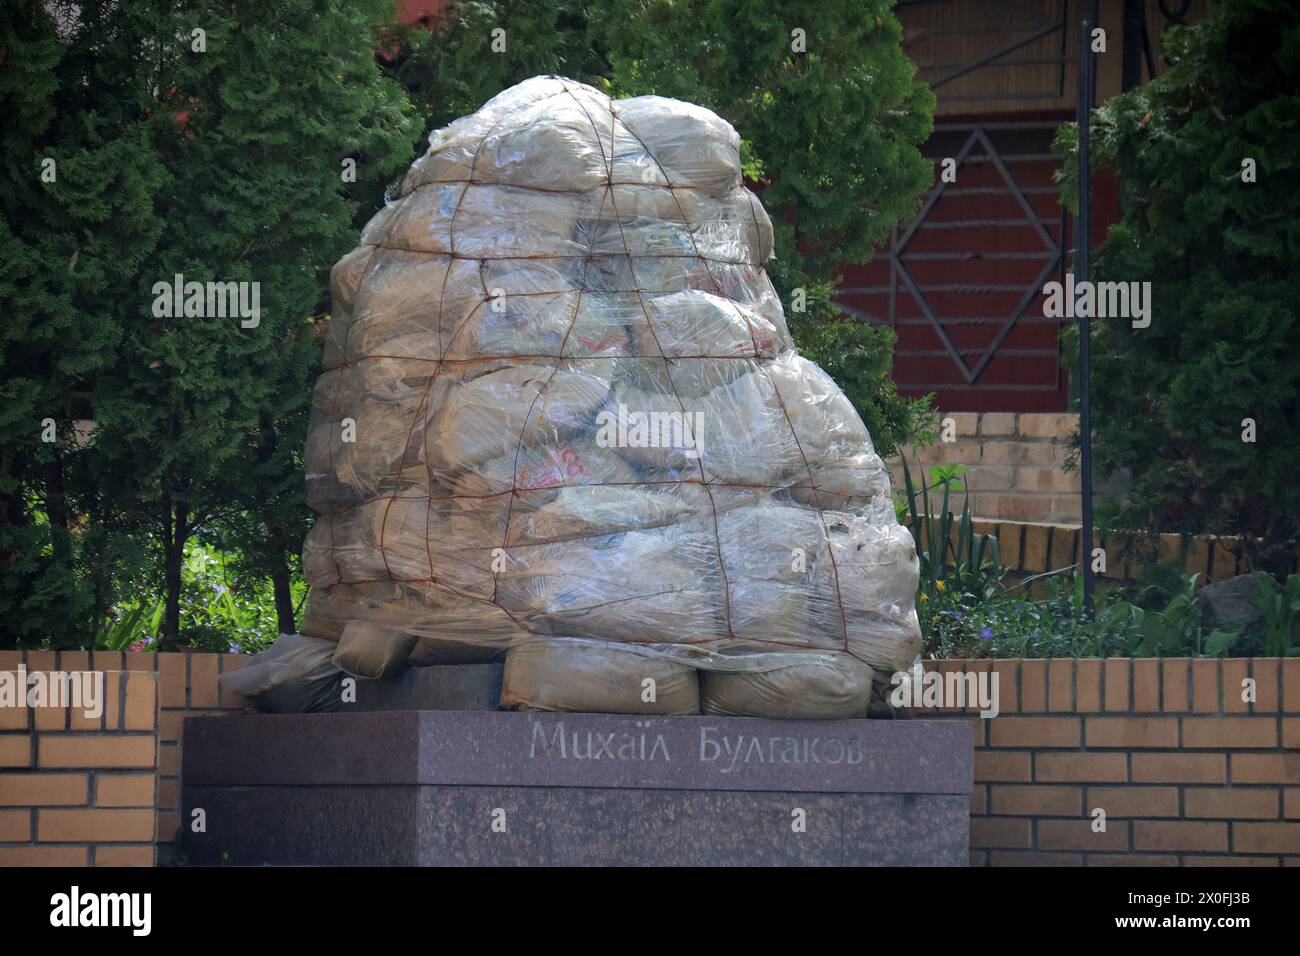 KYIV, UKRAINE - APRIL 11, 2024 - The monument to Mikhail Bulgakov situated on Andriivskyi Descent is sealed from potential damage due to war, Kyiv, capital of Ukraine. Stock Photo